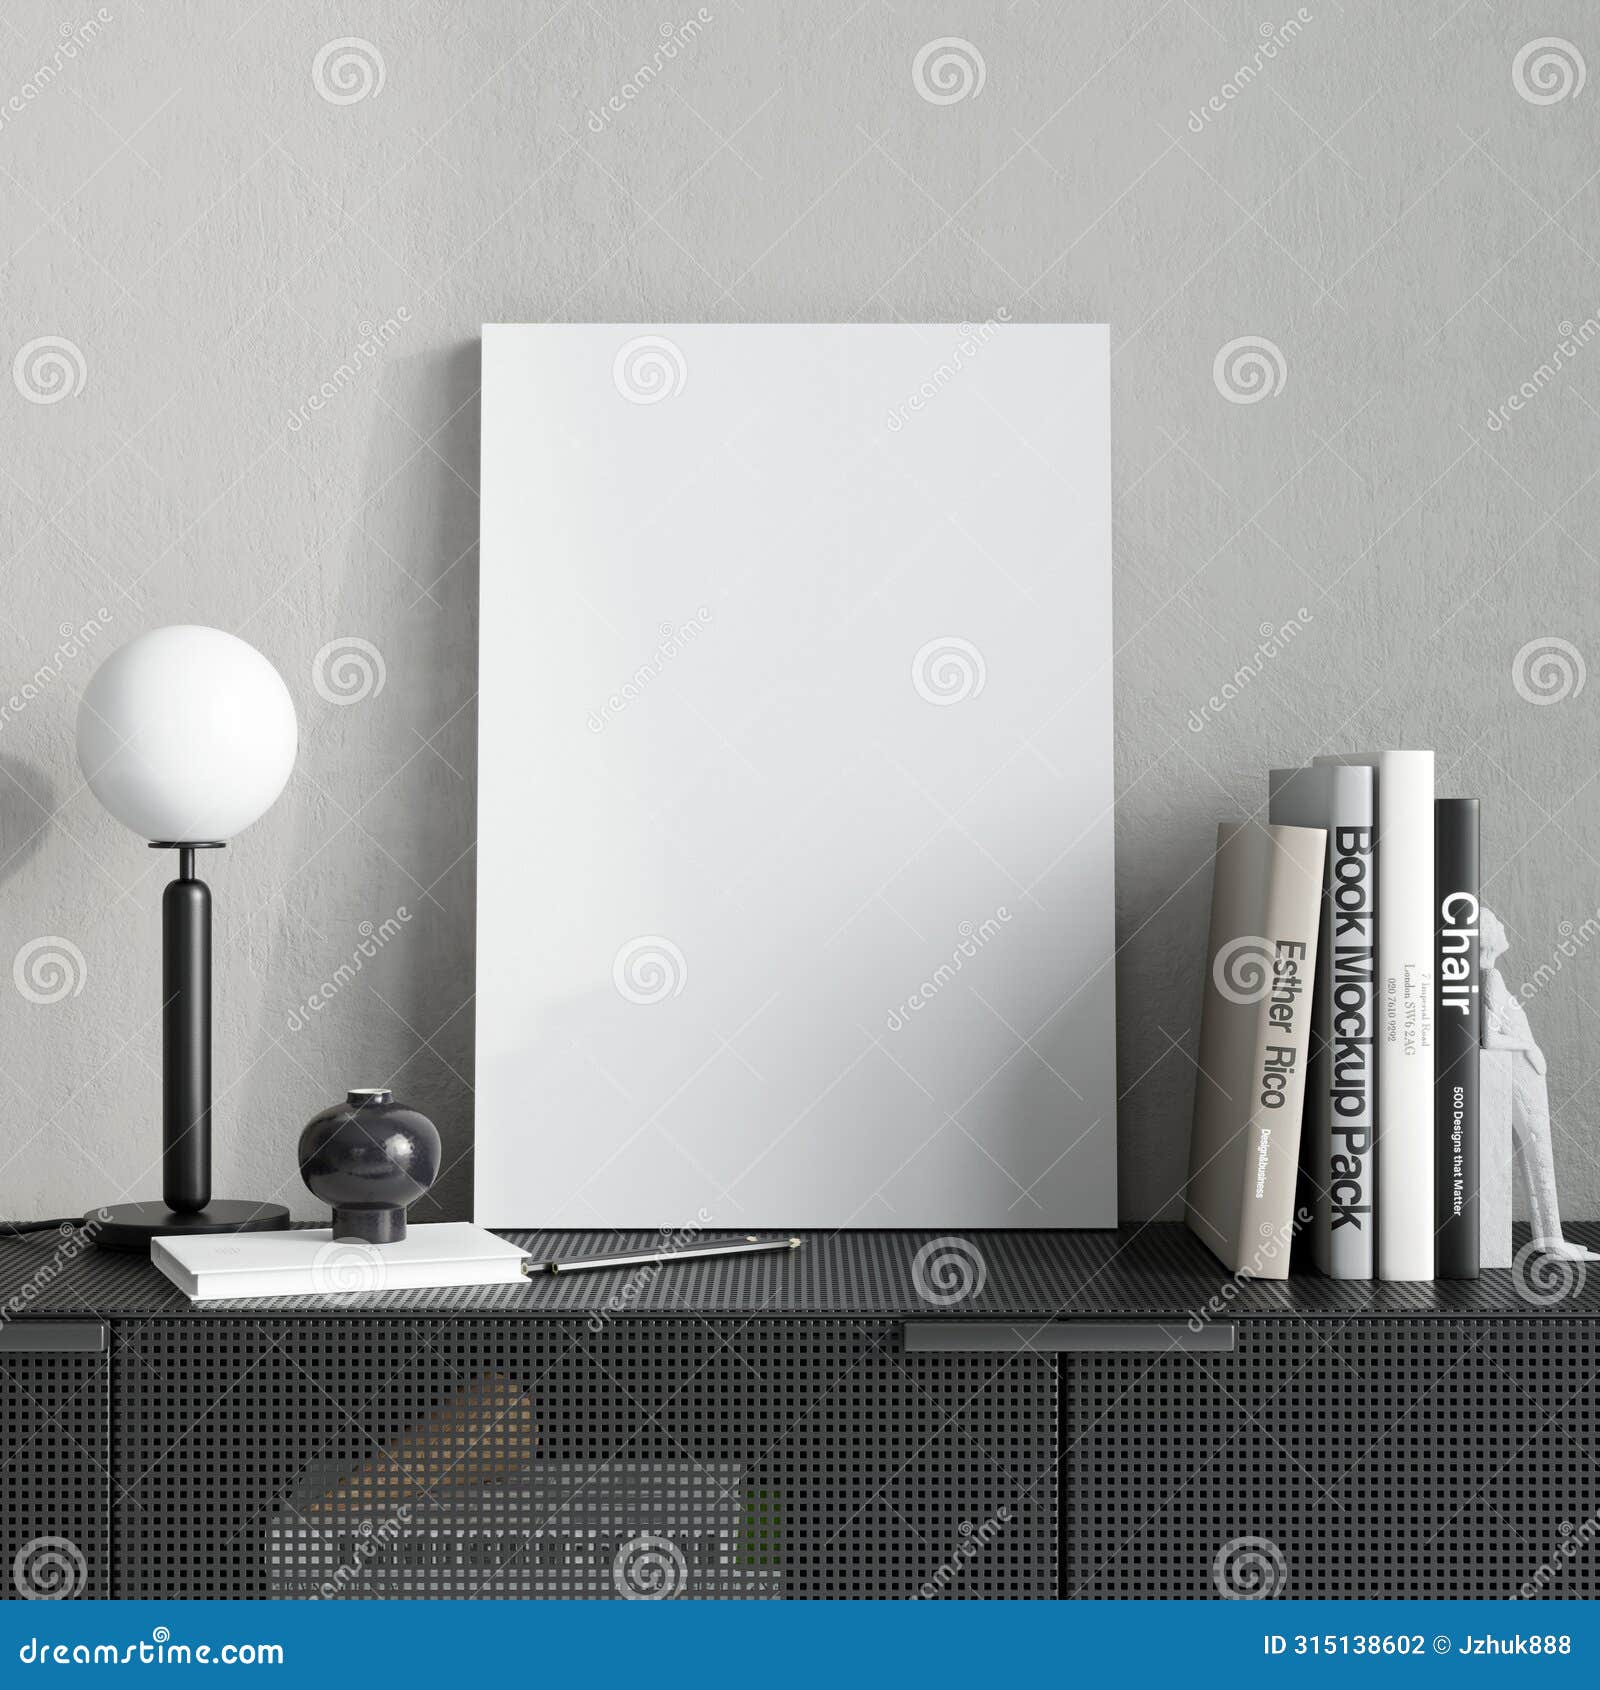 canvas mockup, home interior background with chest of drawers, 3d render, 3d 